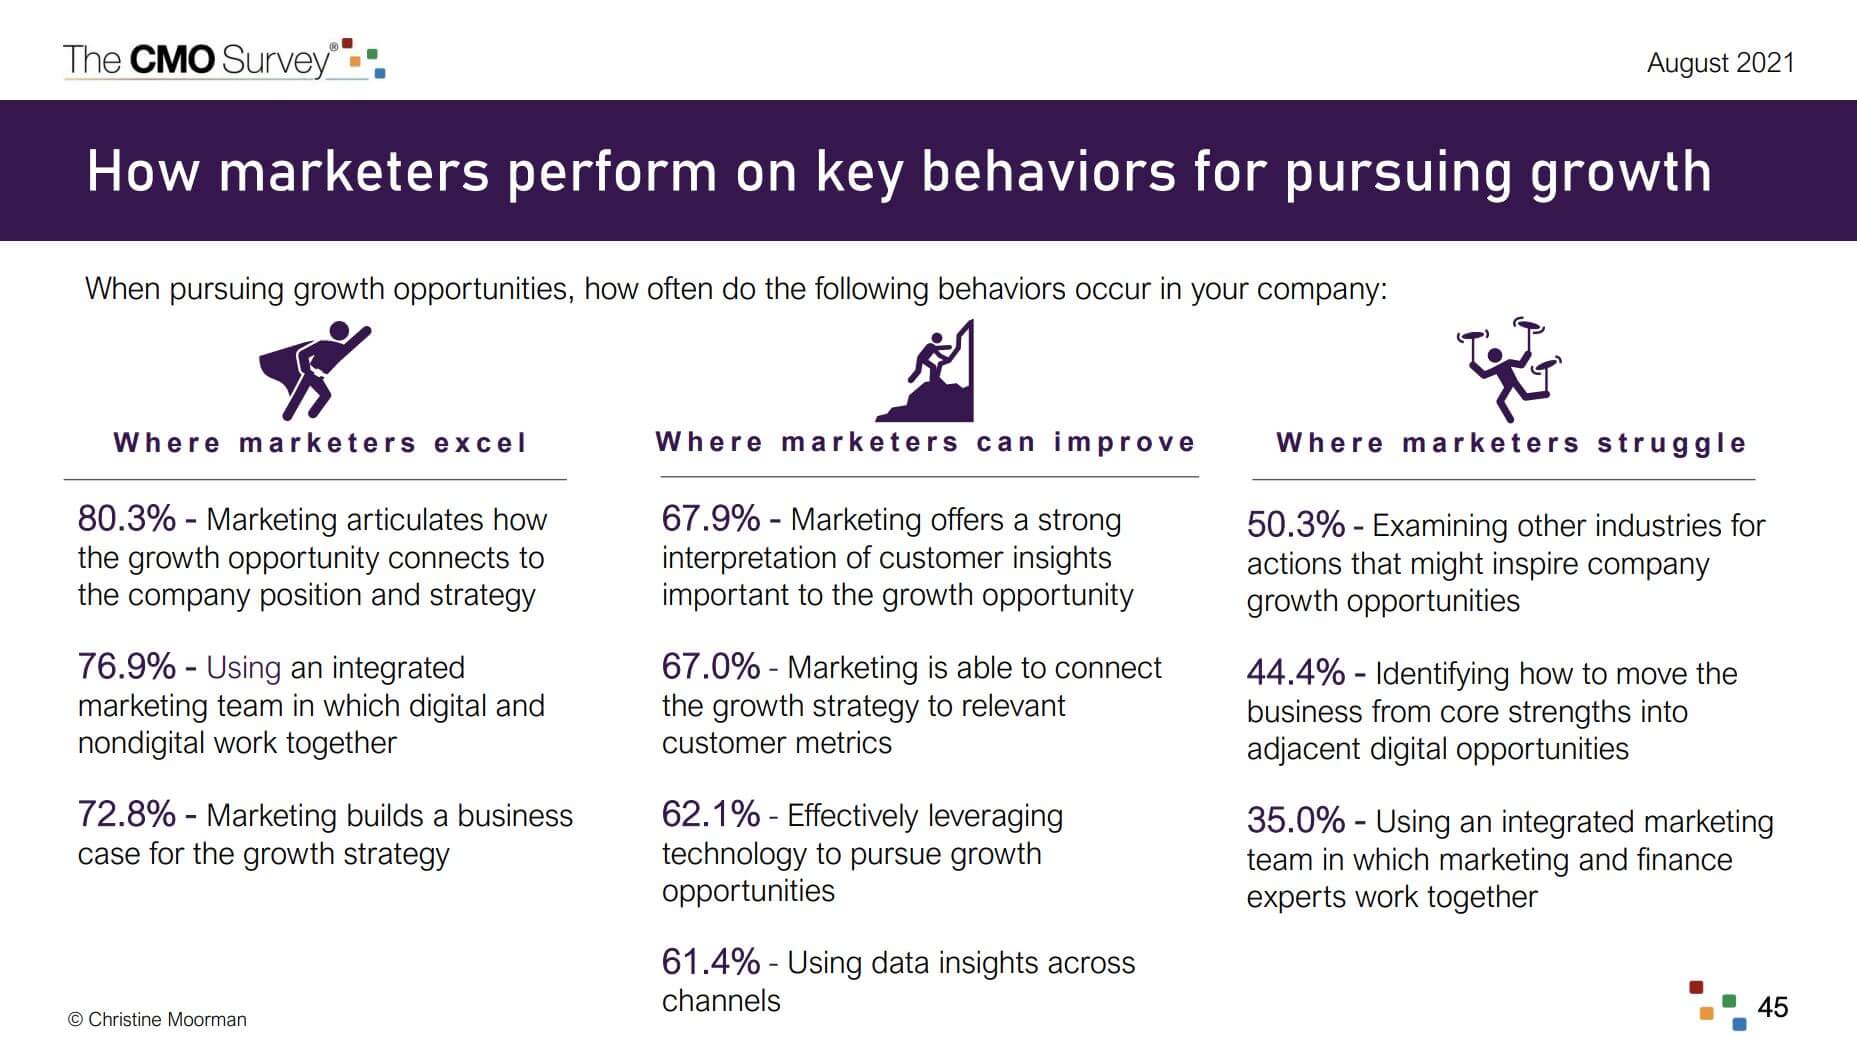 The CMO Survey - How marketers perform on key behaviors for pursuing growth